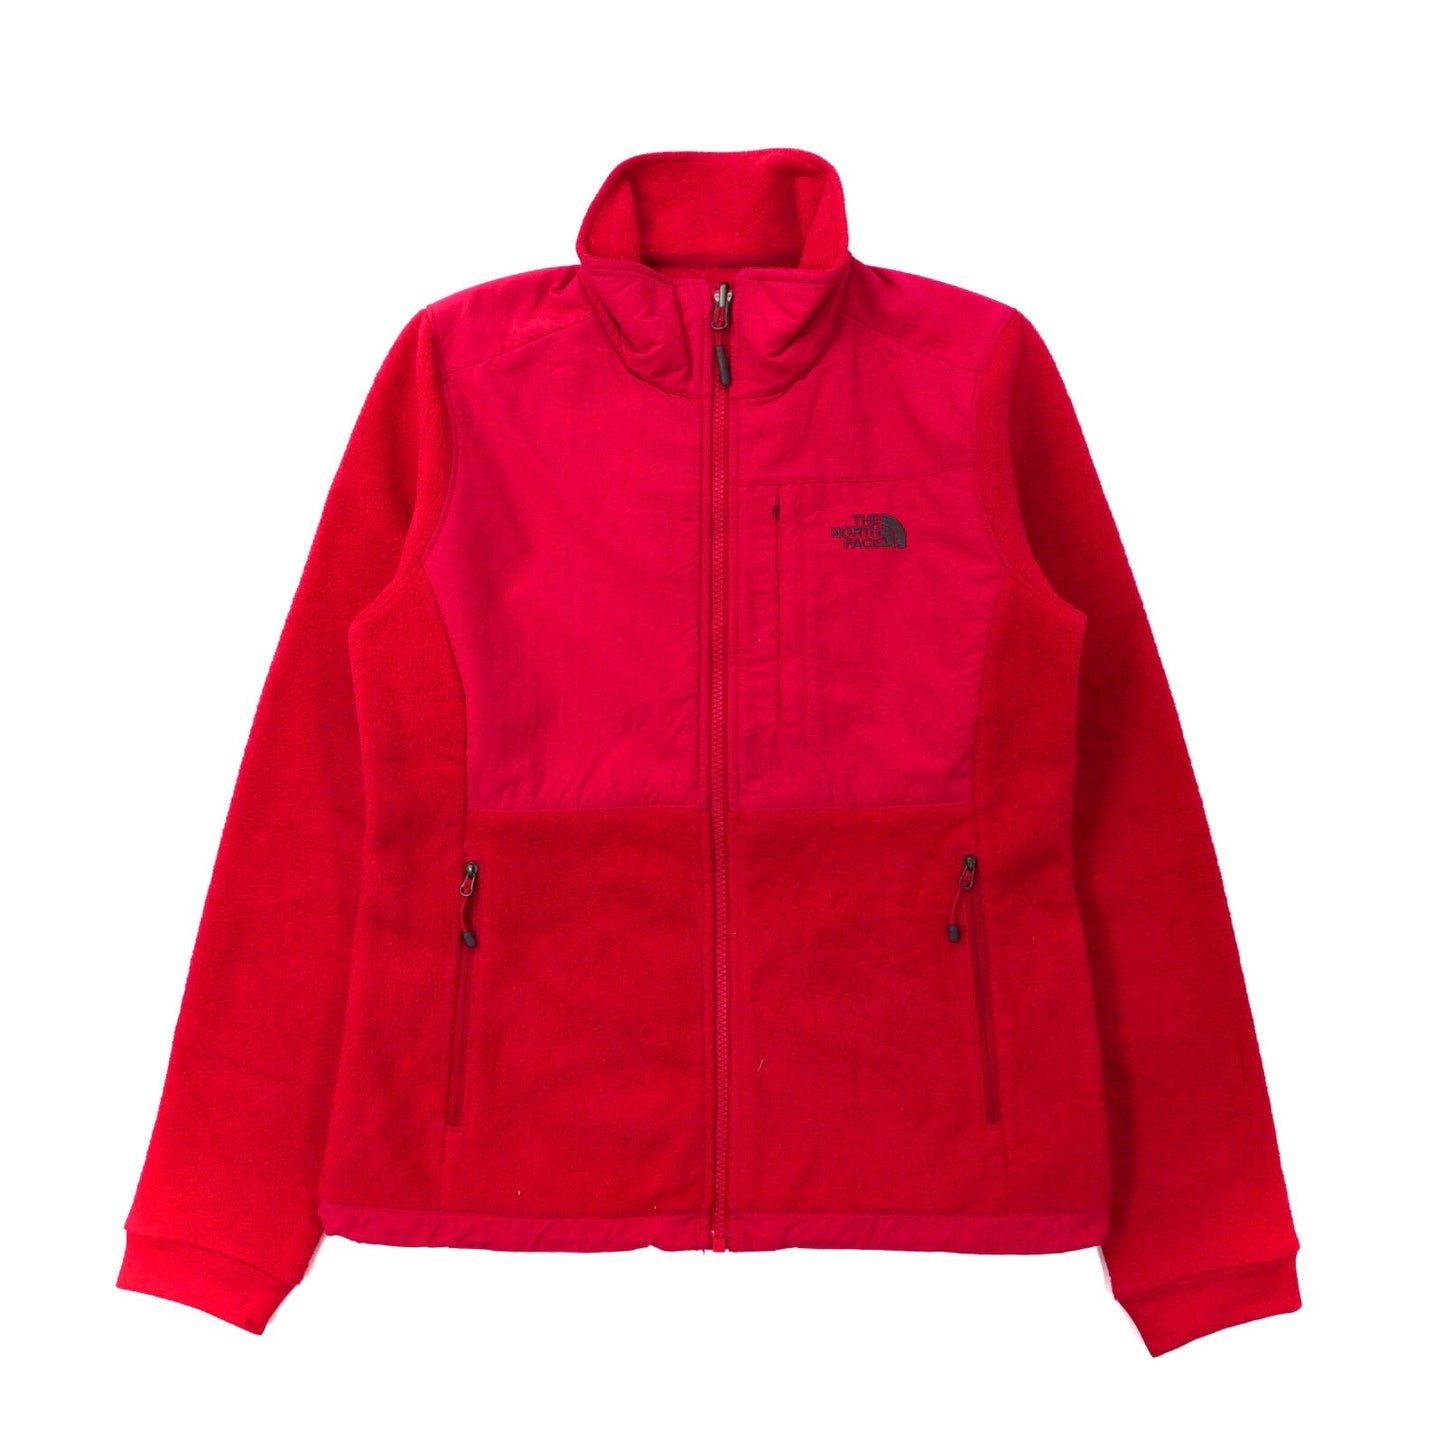 THE NORTH FACE ナイロン切替フリースジャケット XS ピンク POLARTEC-THE NORTH FACE-古着